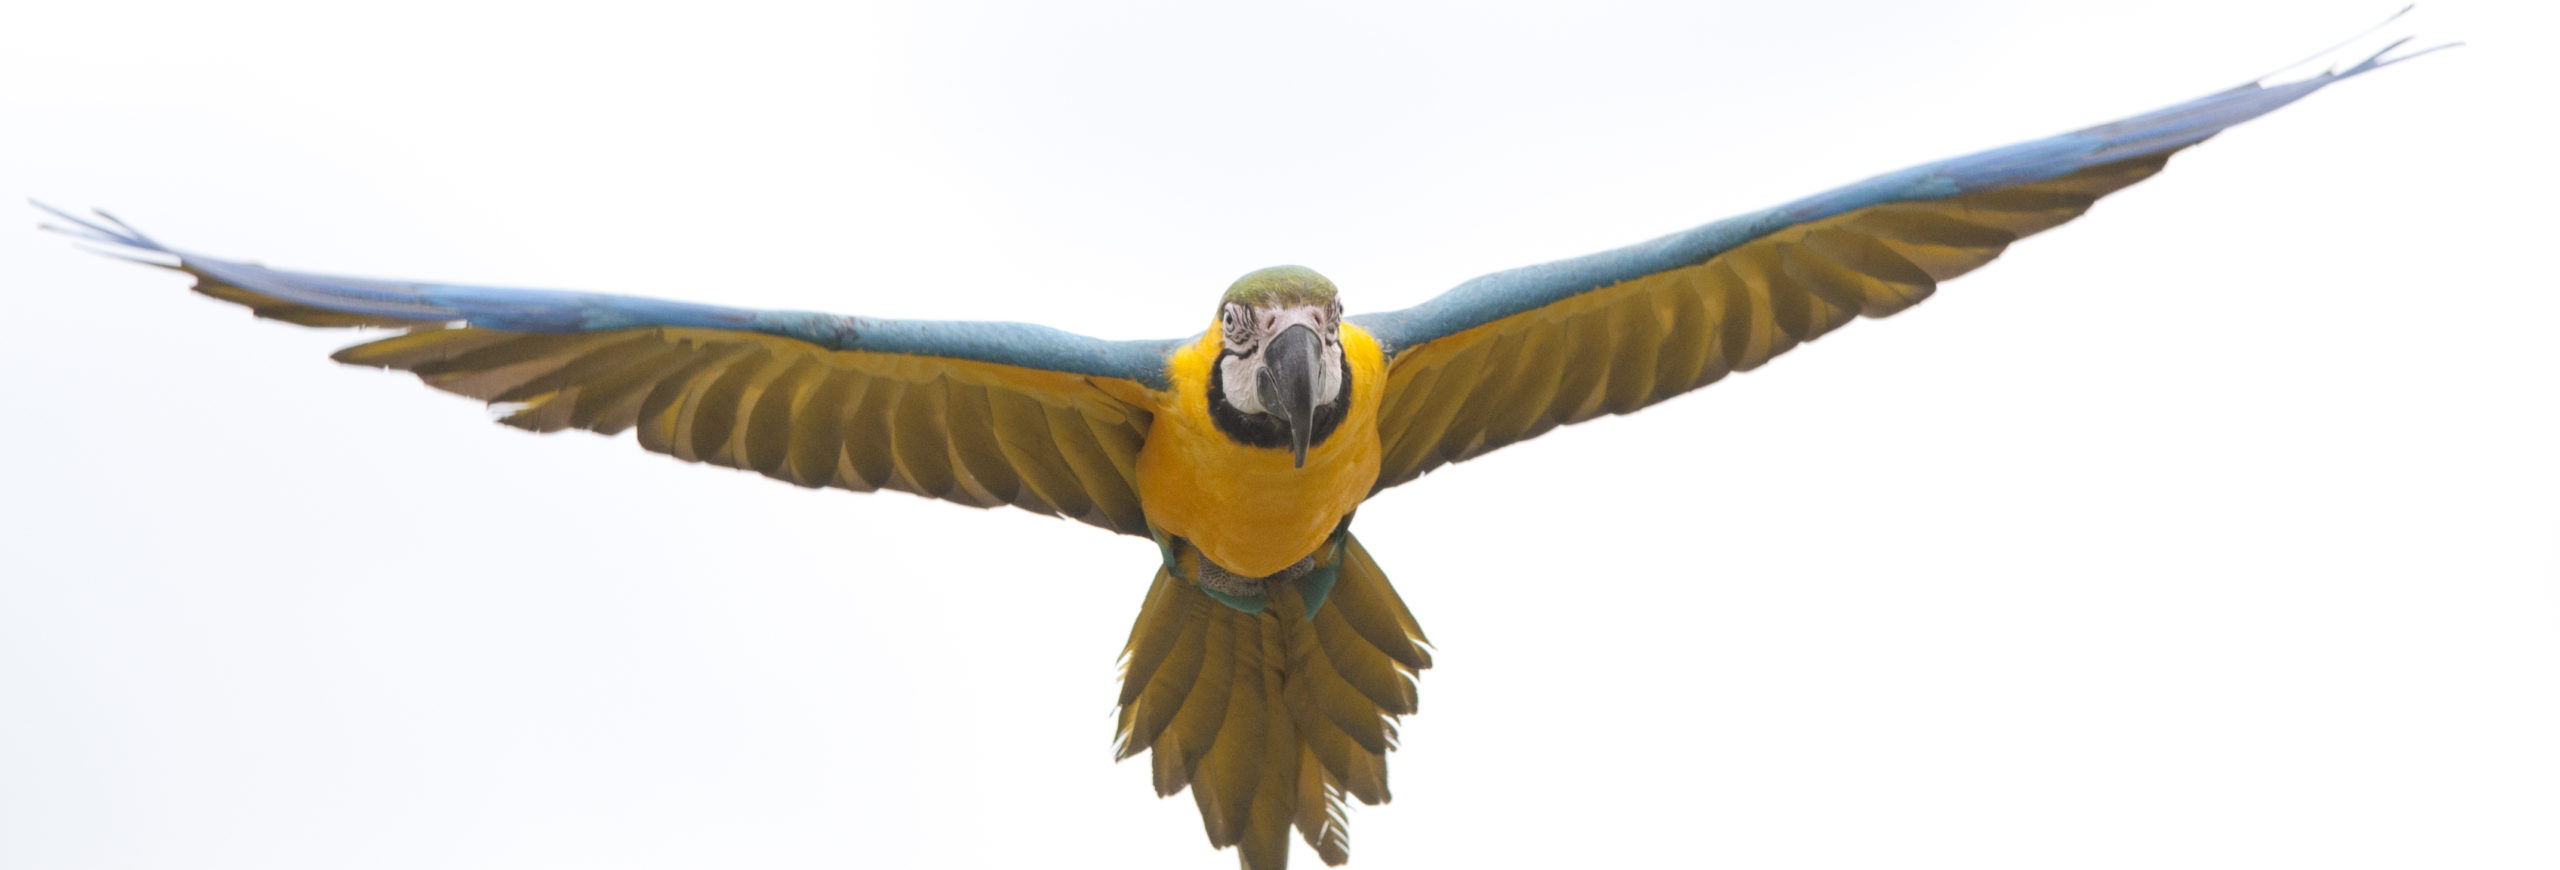 Blue & Gold Macaw in flight on white background